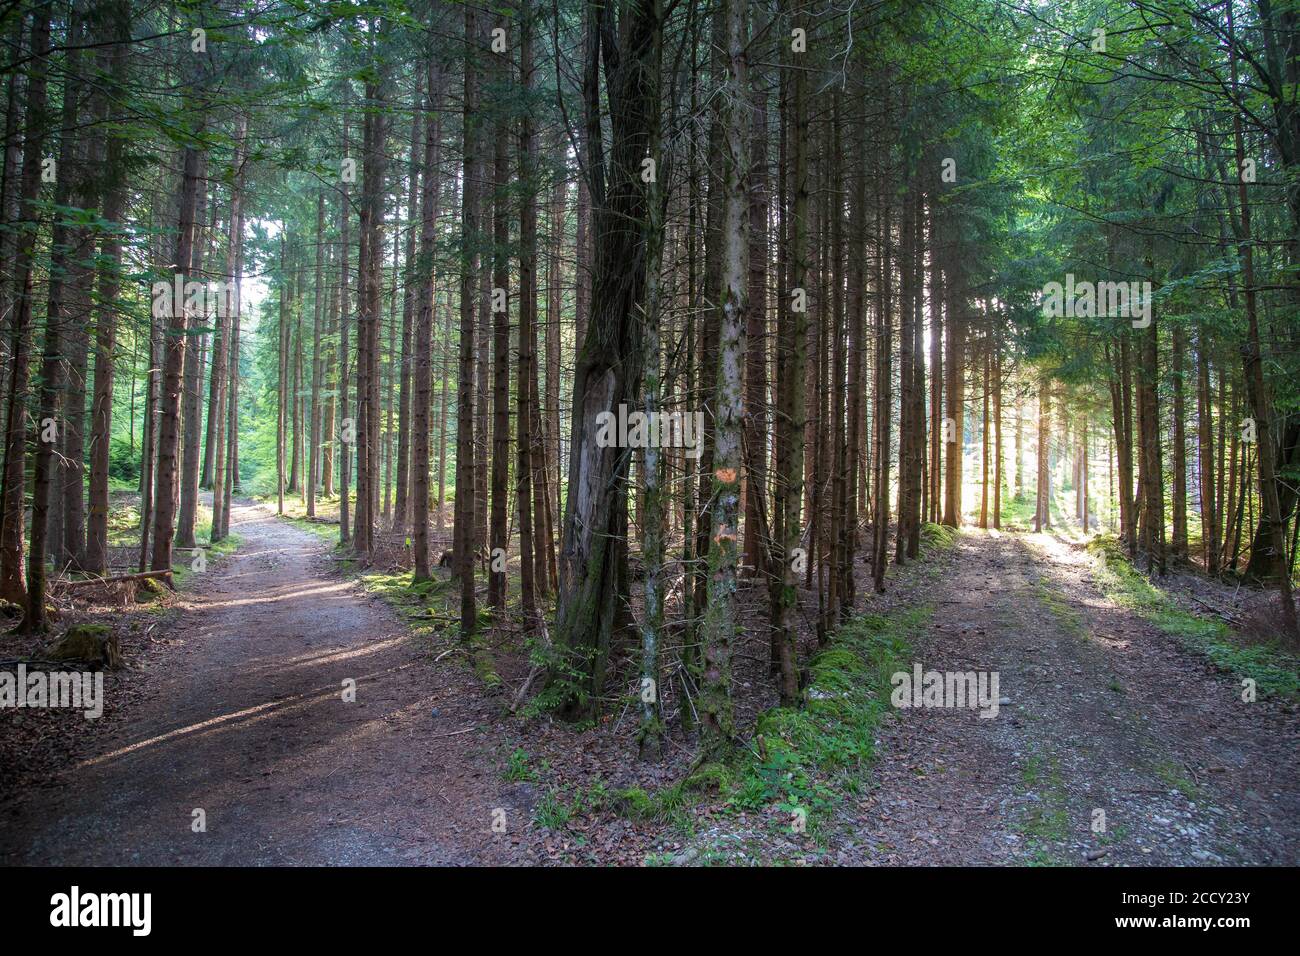 Fork in the road, morning mood in the forest, Aying, Bavaria, Germany Stock Photo